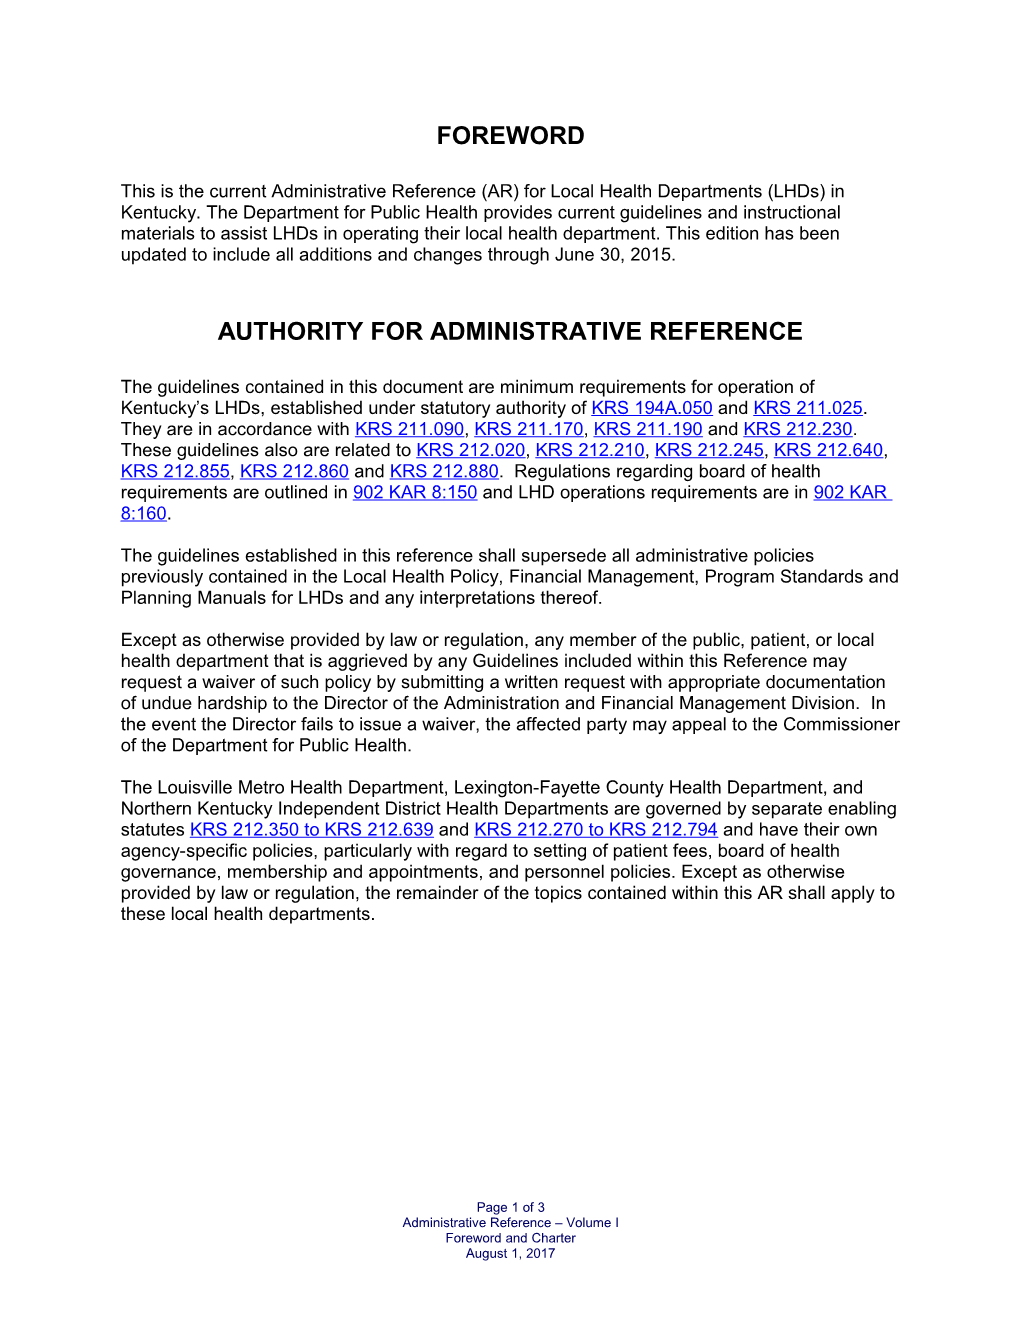 Authority for Administrative Reference